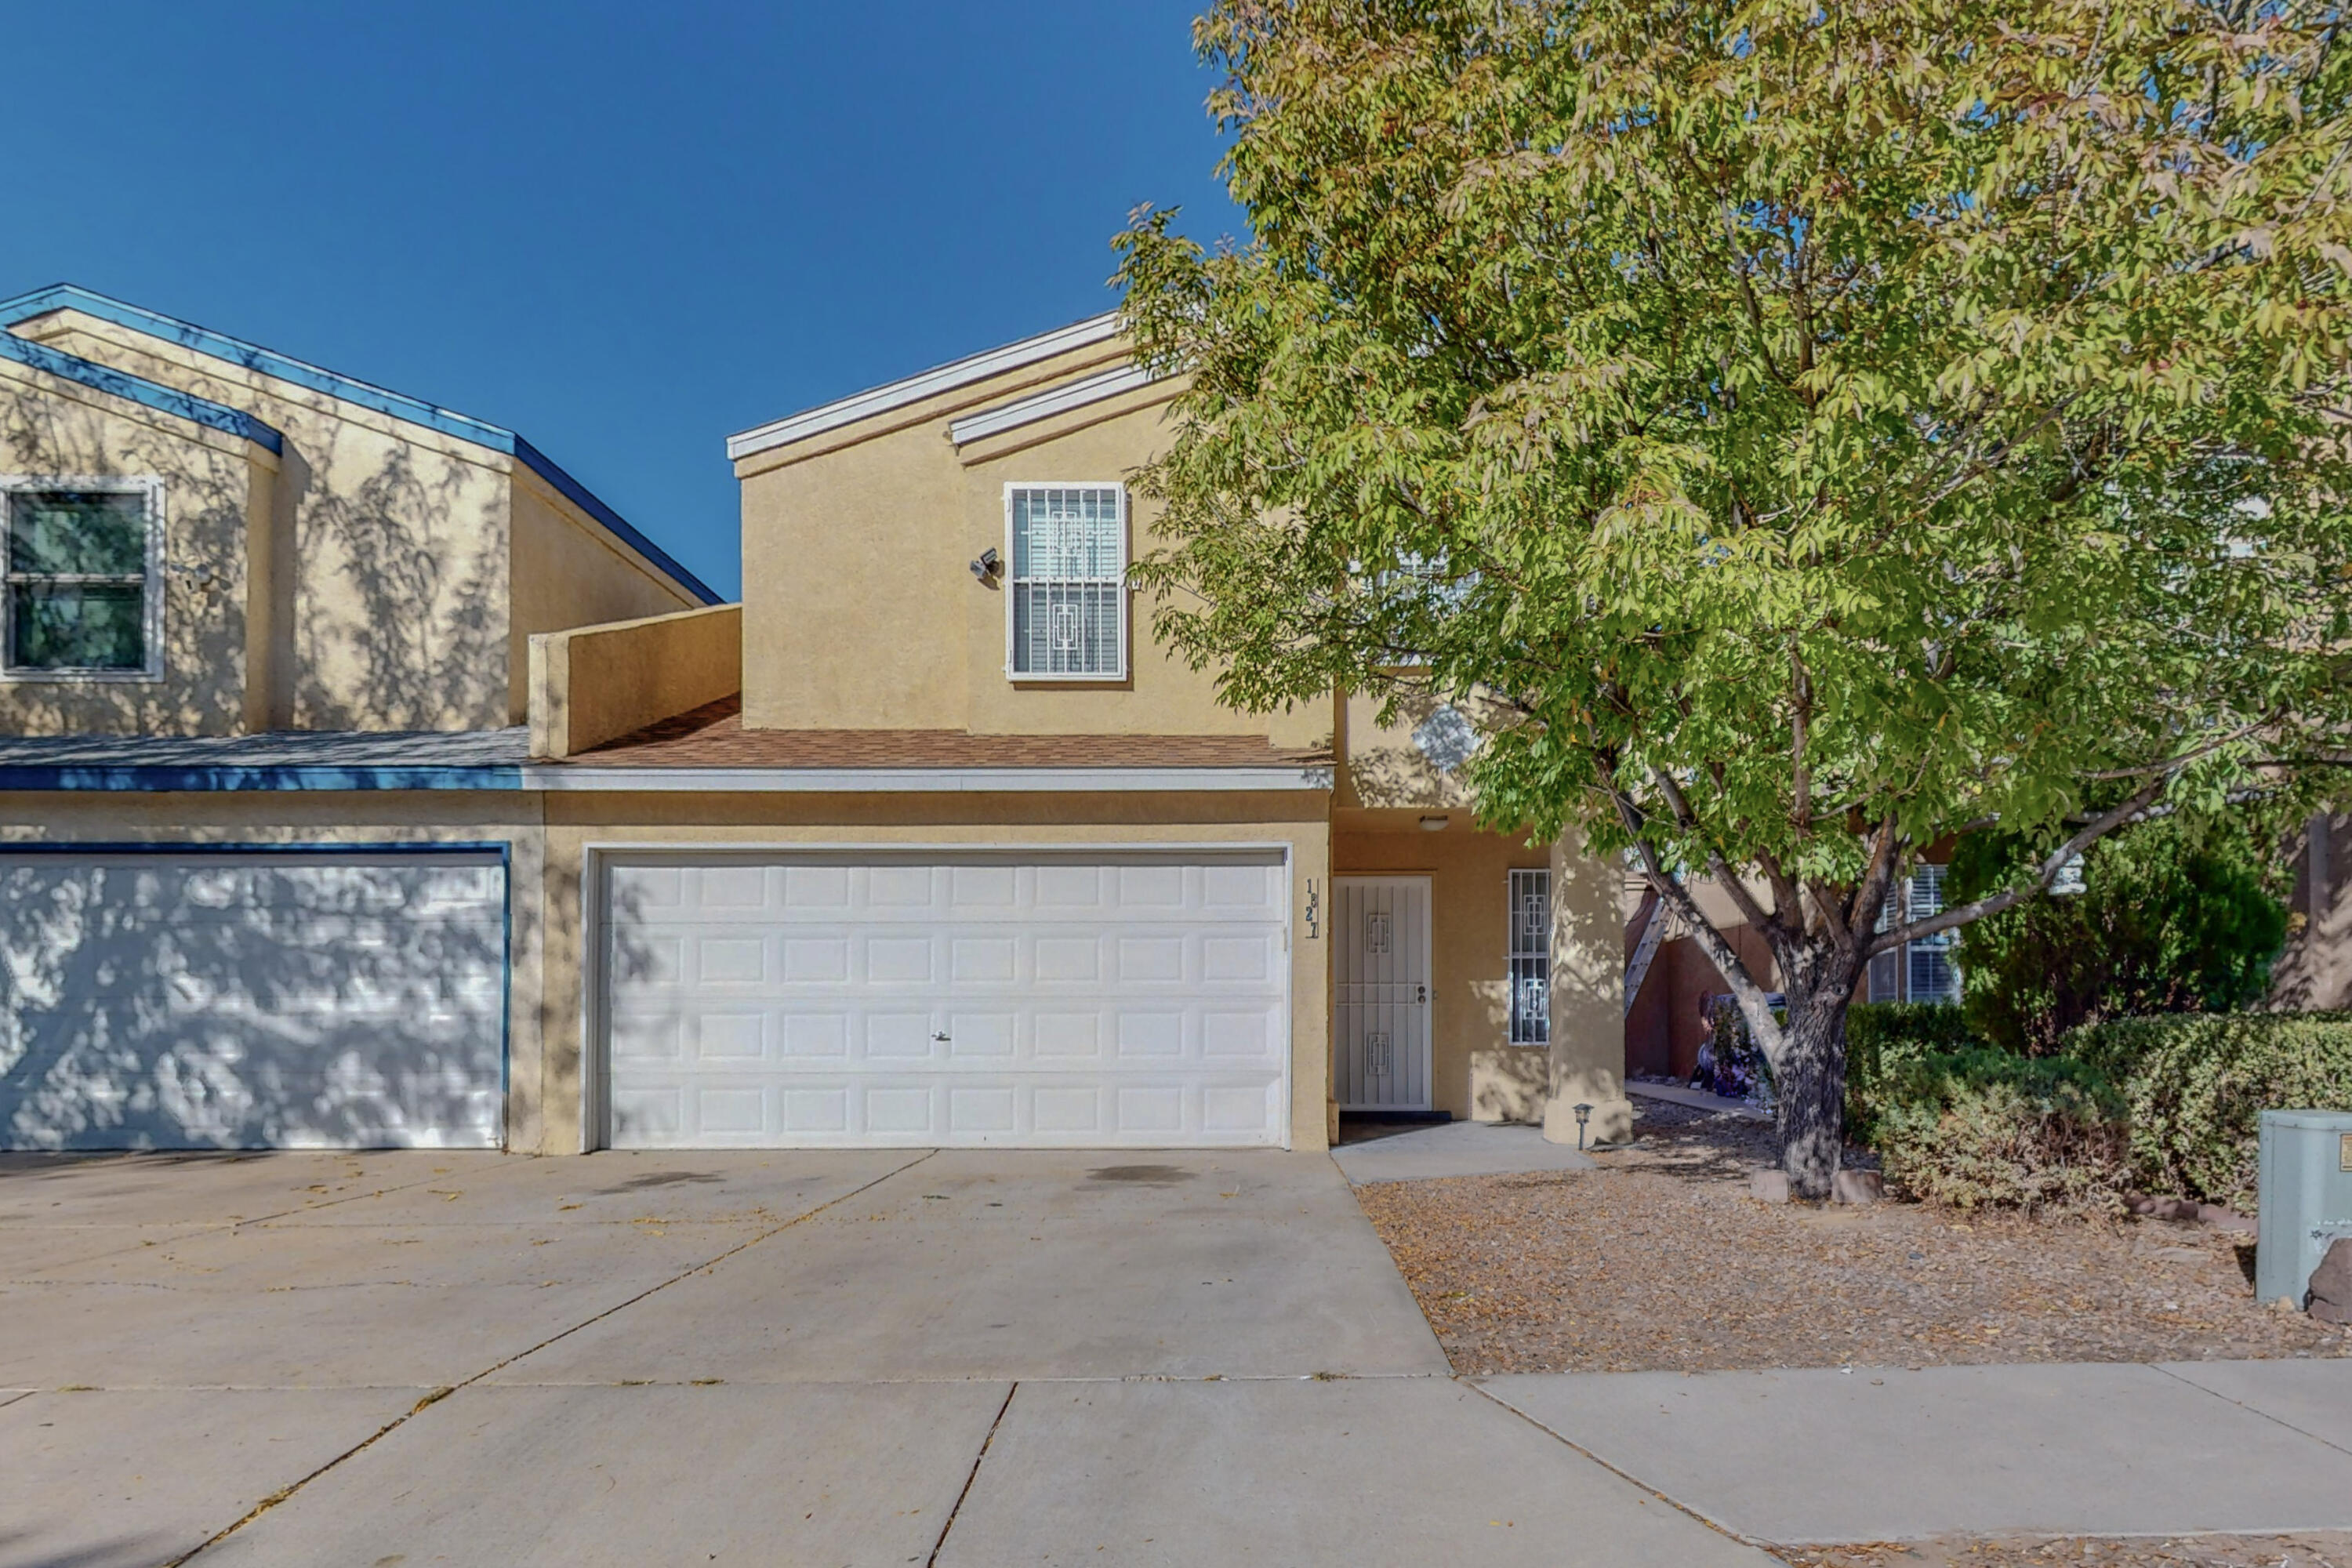 This Move-in ready townhome is in a prime location close to shopping, cafes, restaurants & freeways. This well kept and recently updated townhome offers new flooring, appliances as well as a new roof installed 2021!! This home awaits it's new owners! schedule your showing today.